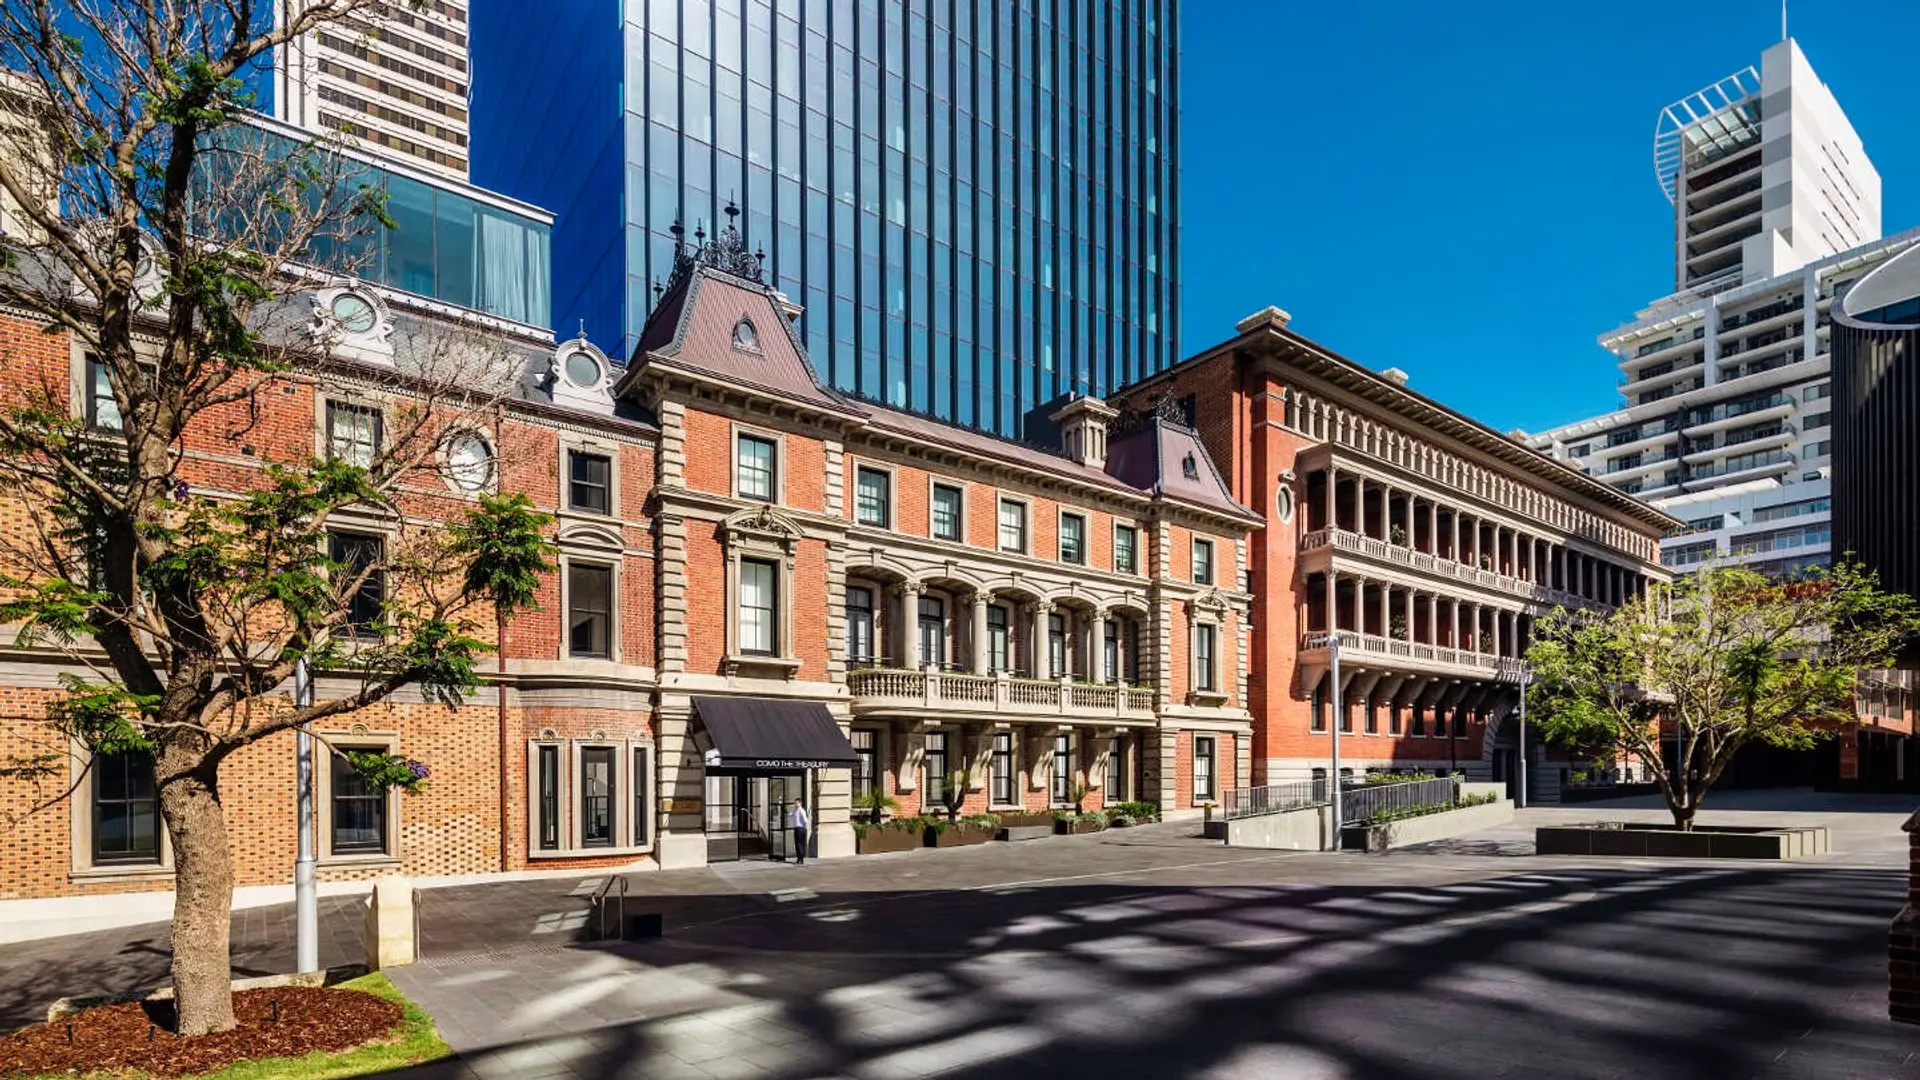 Hotels Toplists - The Best Luxury Hotels in Perth